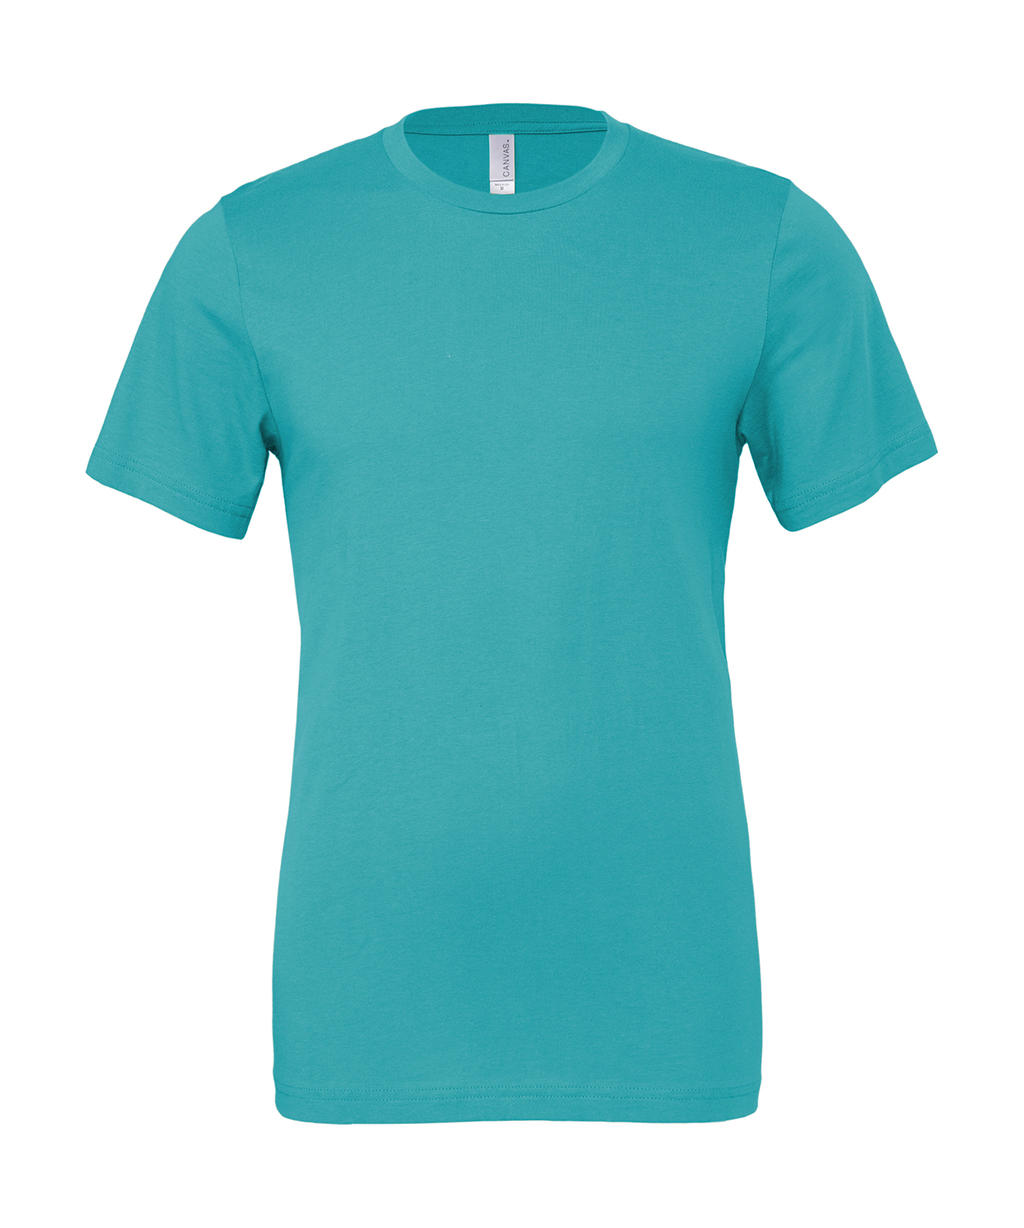  Unisex Jersey Short Sleeve Tee in Farbe Teal